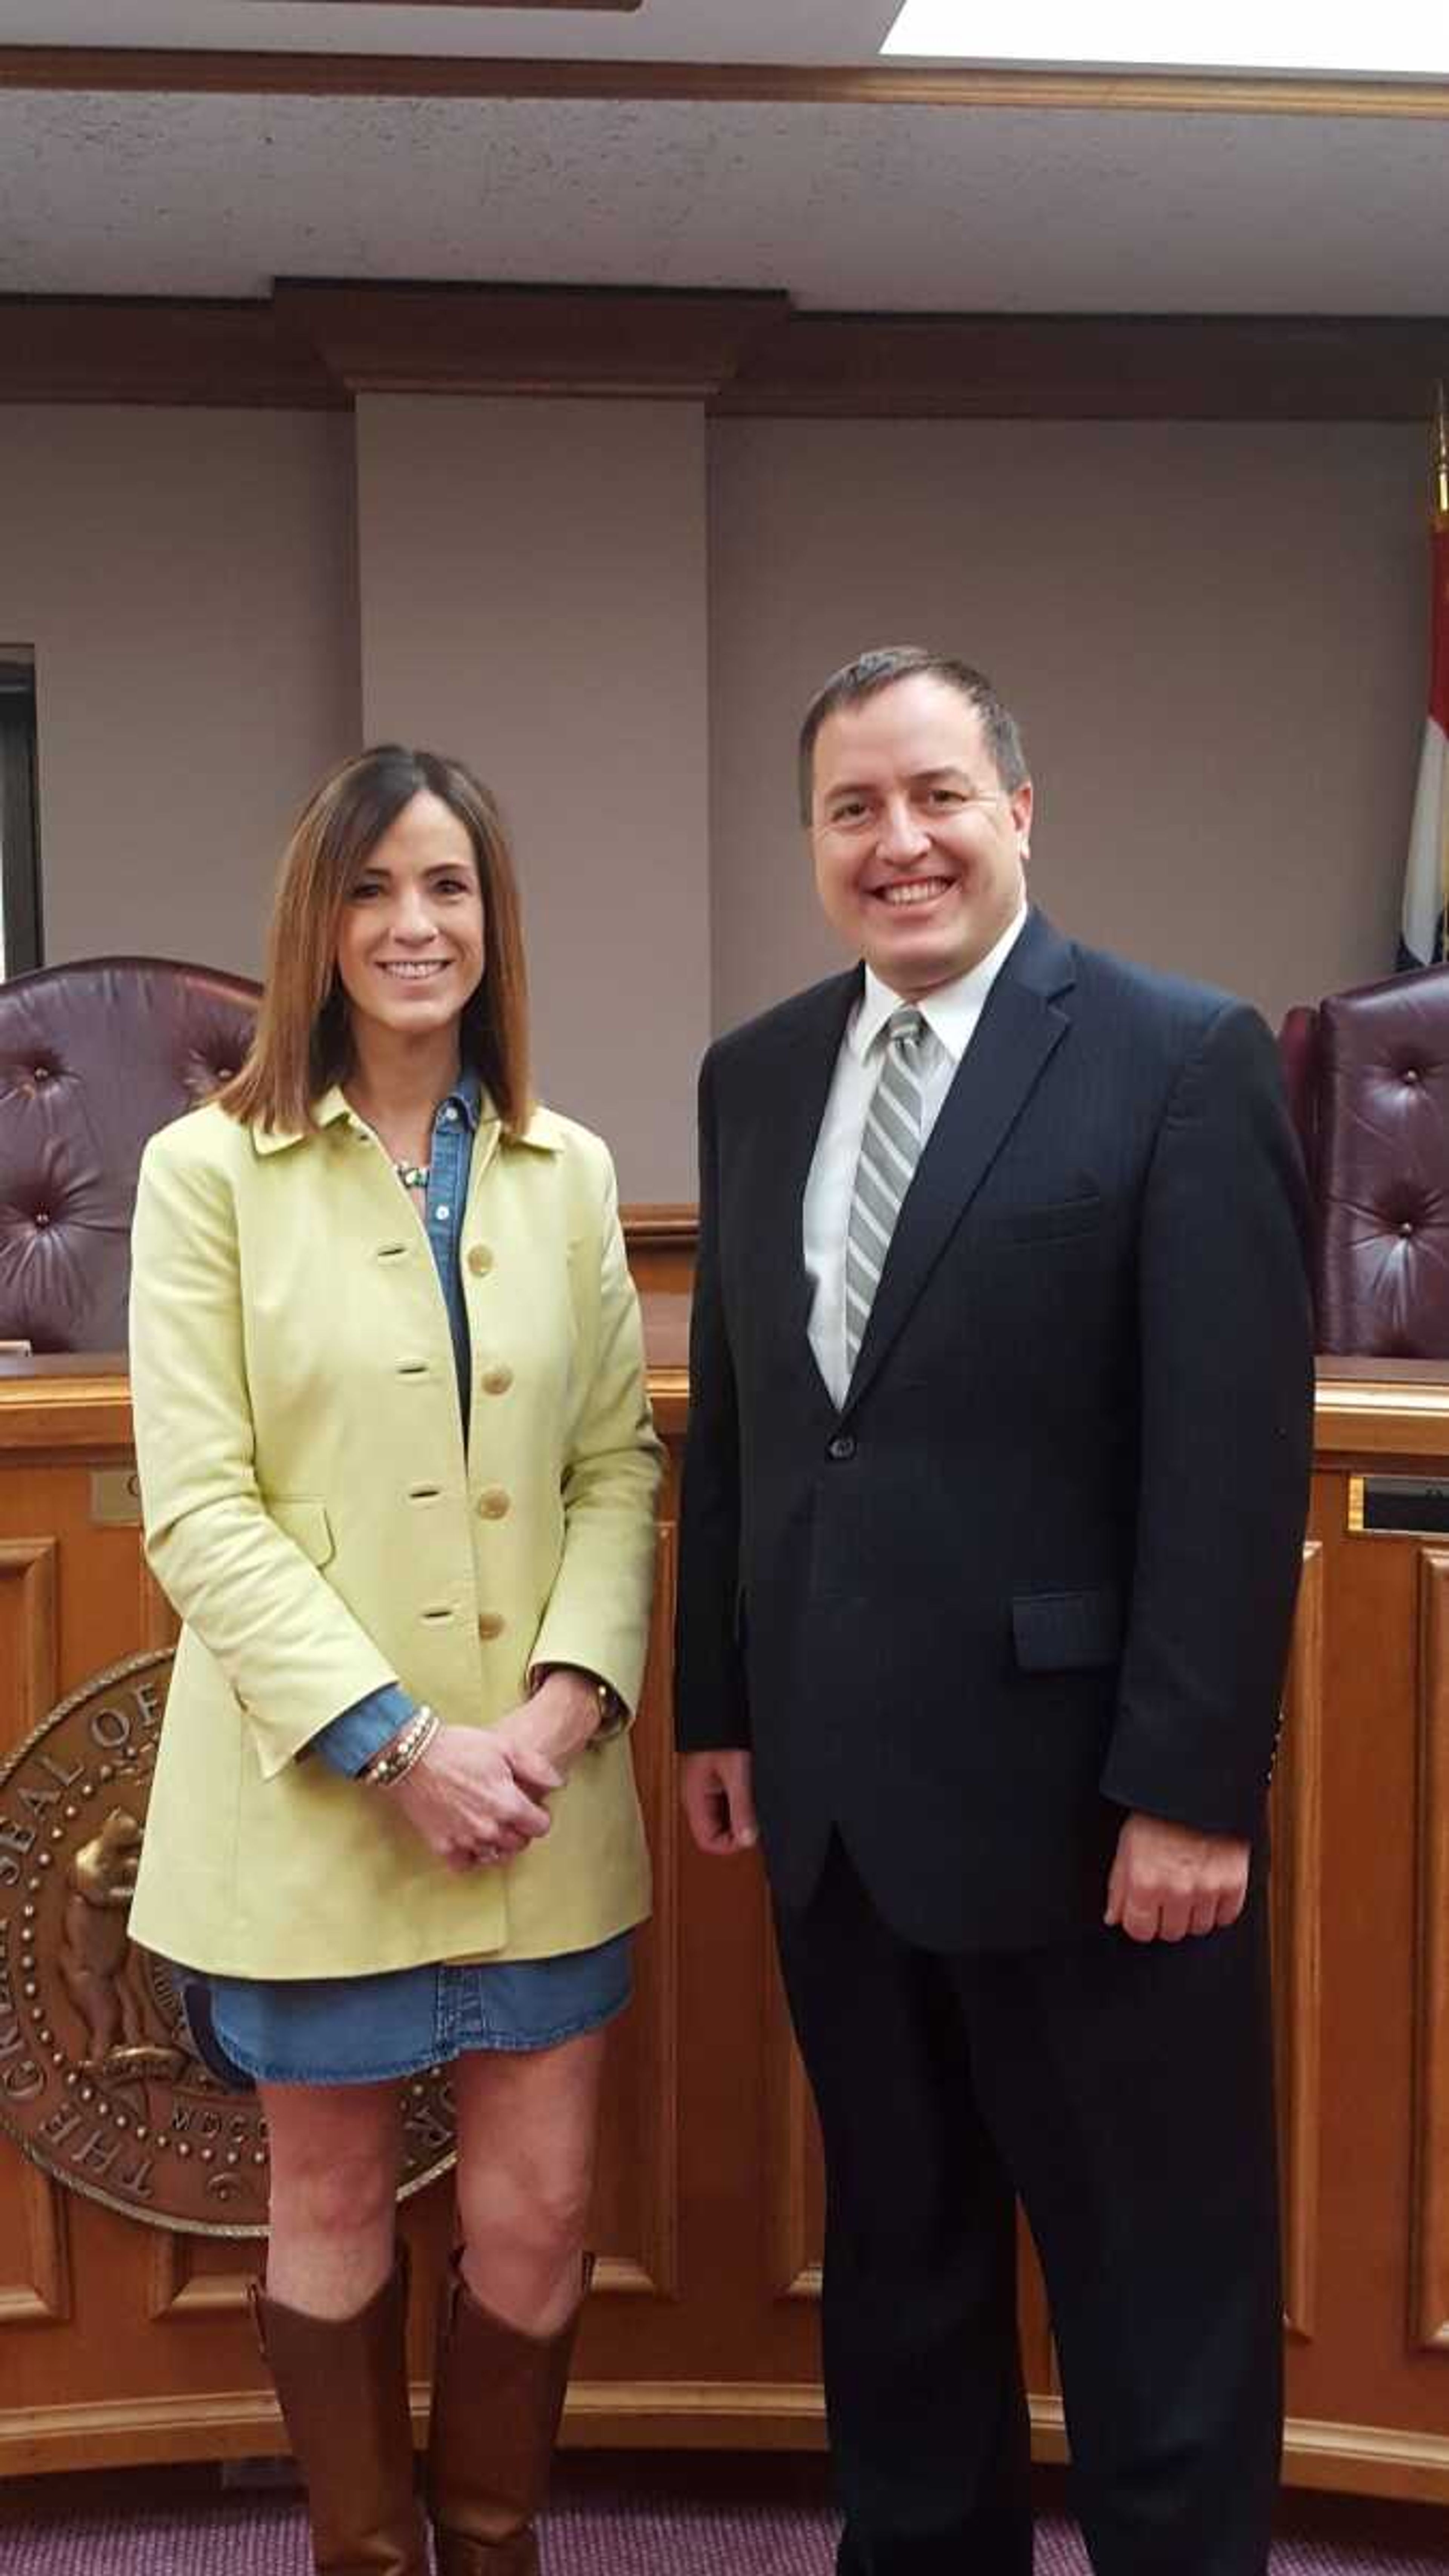 County Clerk Kara Clark Summers posing for a picture with Secretary of State Jay Ashcroft on Wed., Oct. 24